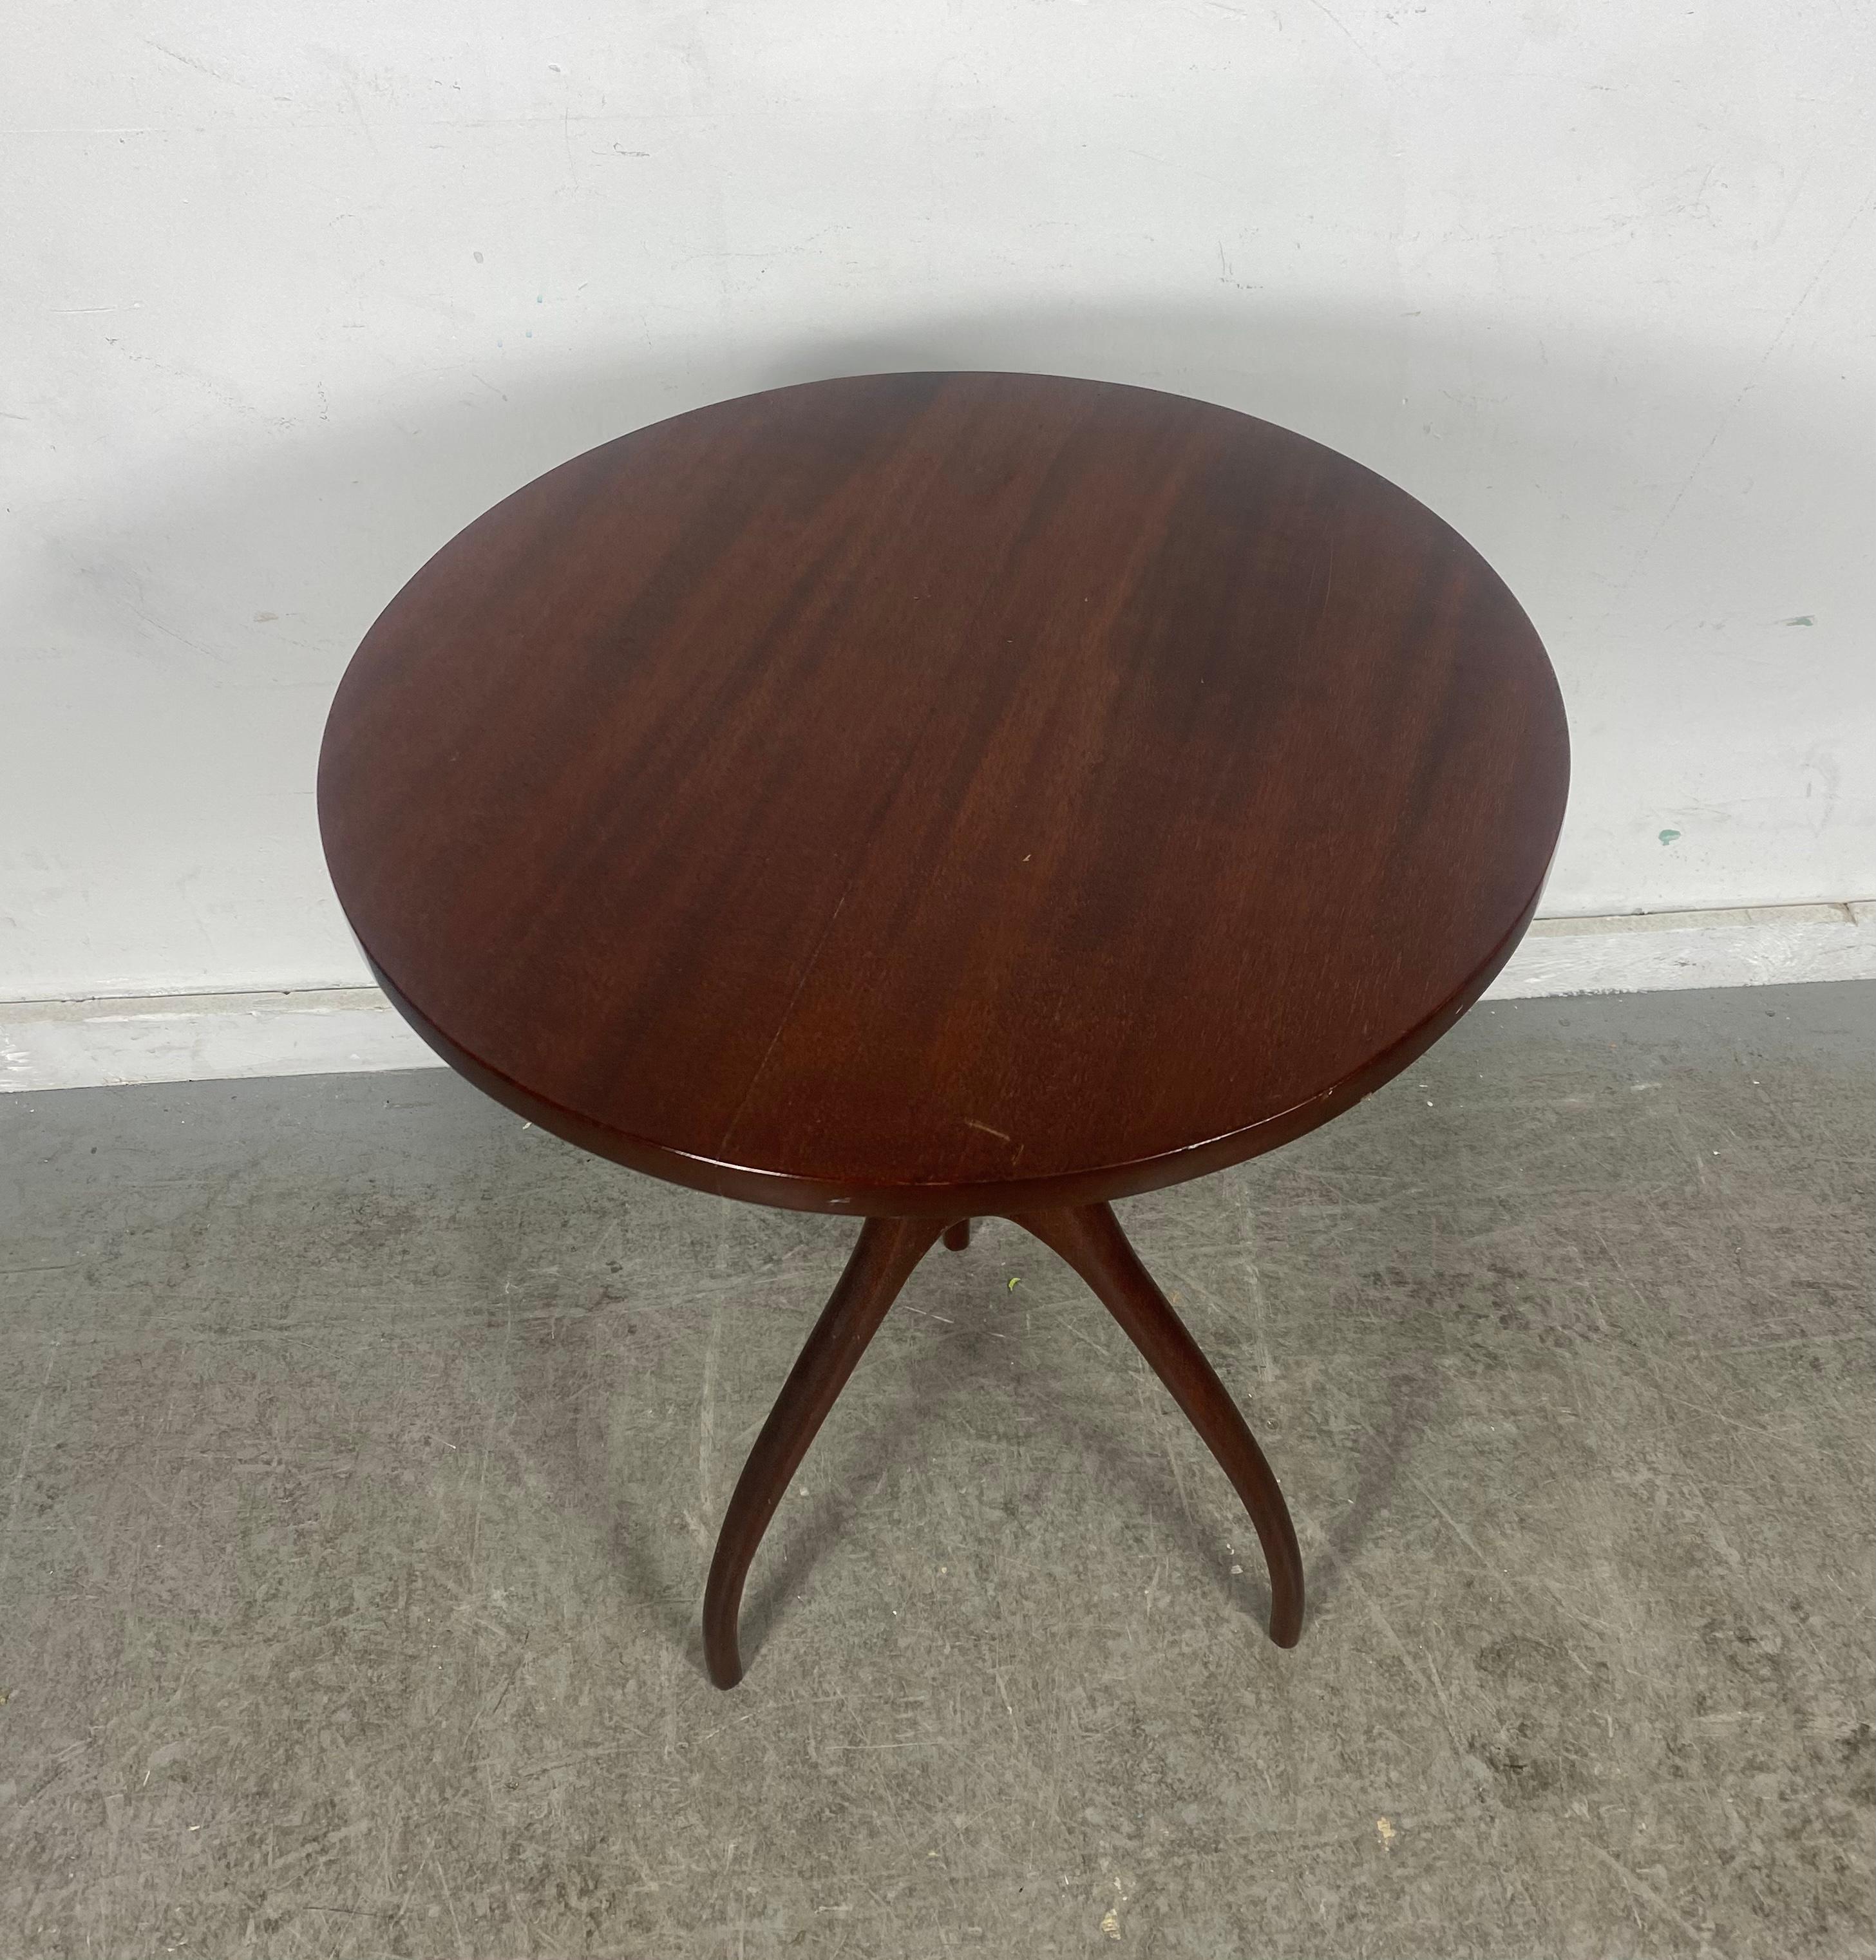 Stylish Midcentury Mahogany Tripod Lamp Table / Stand Attrib to Edward Wormley For Sale 2